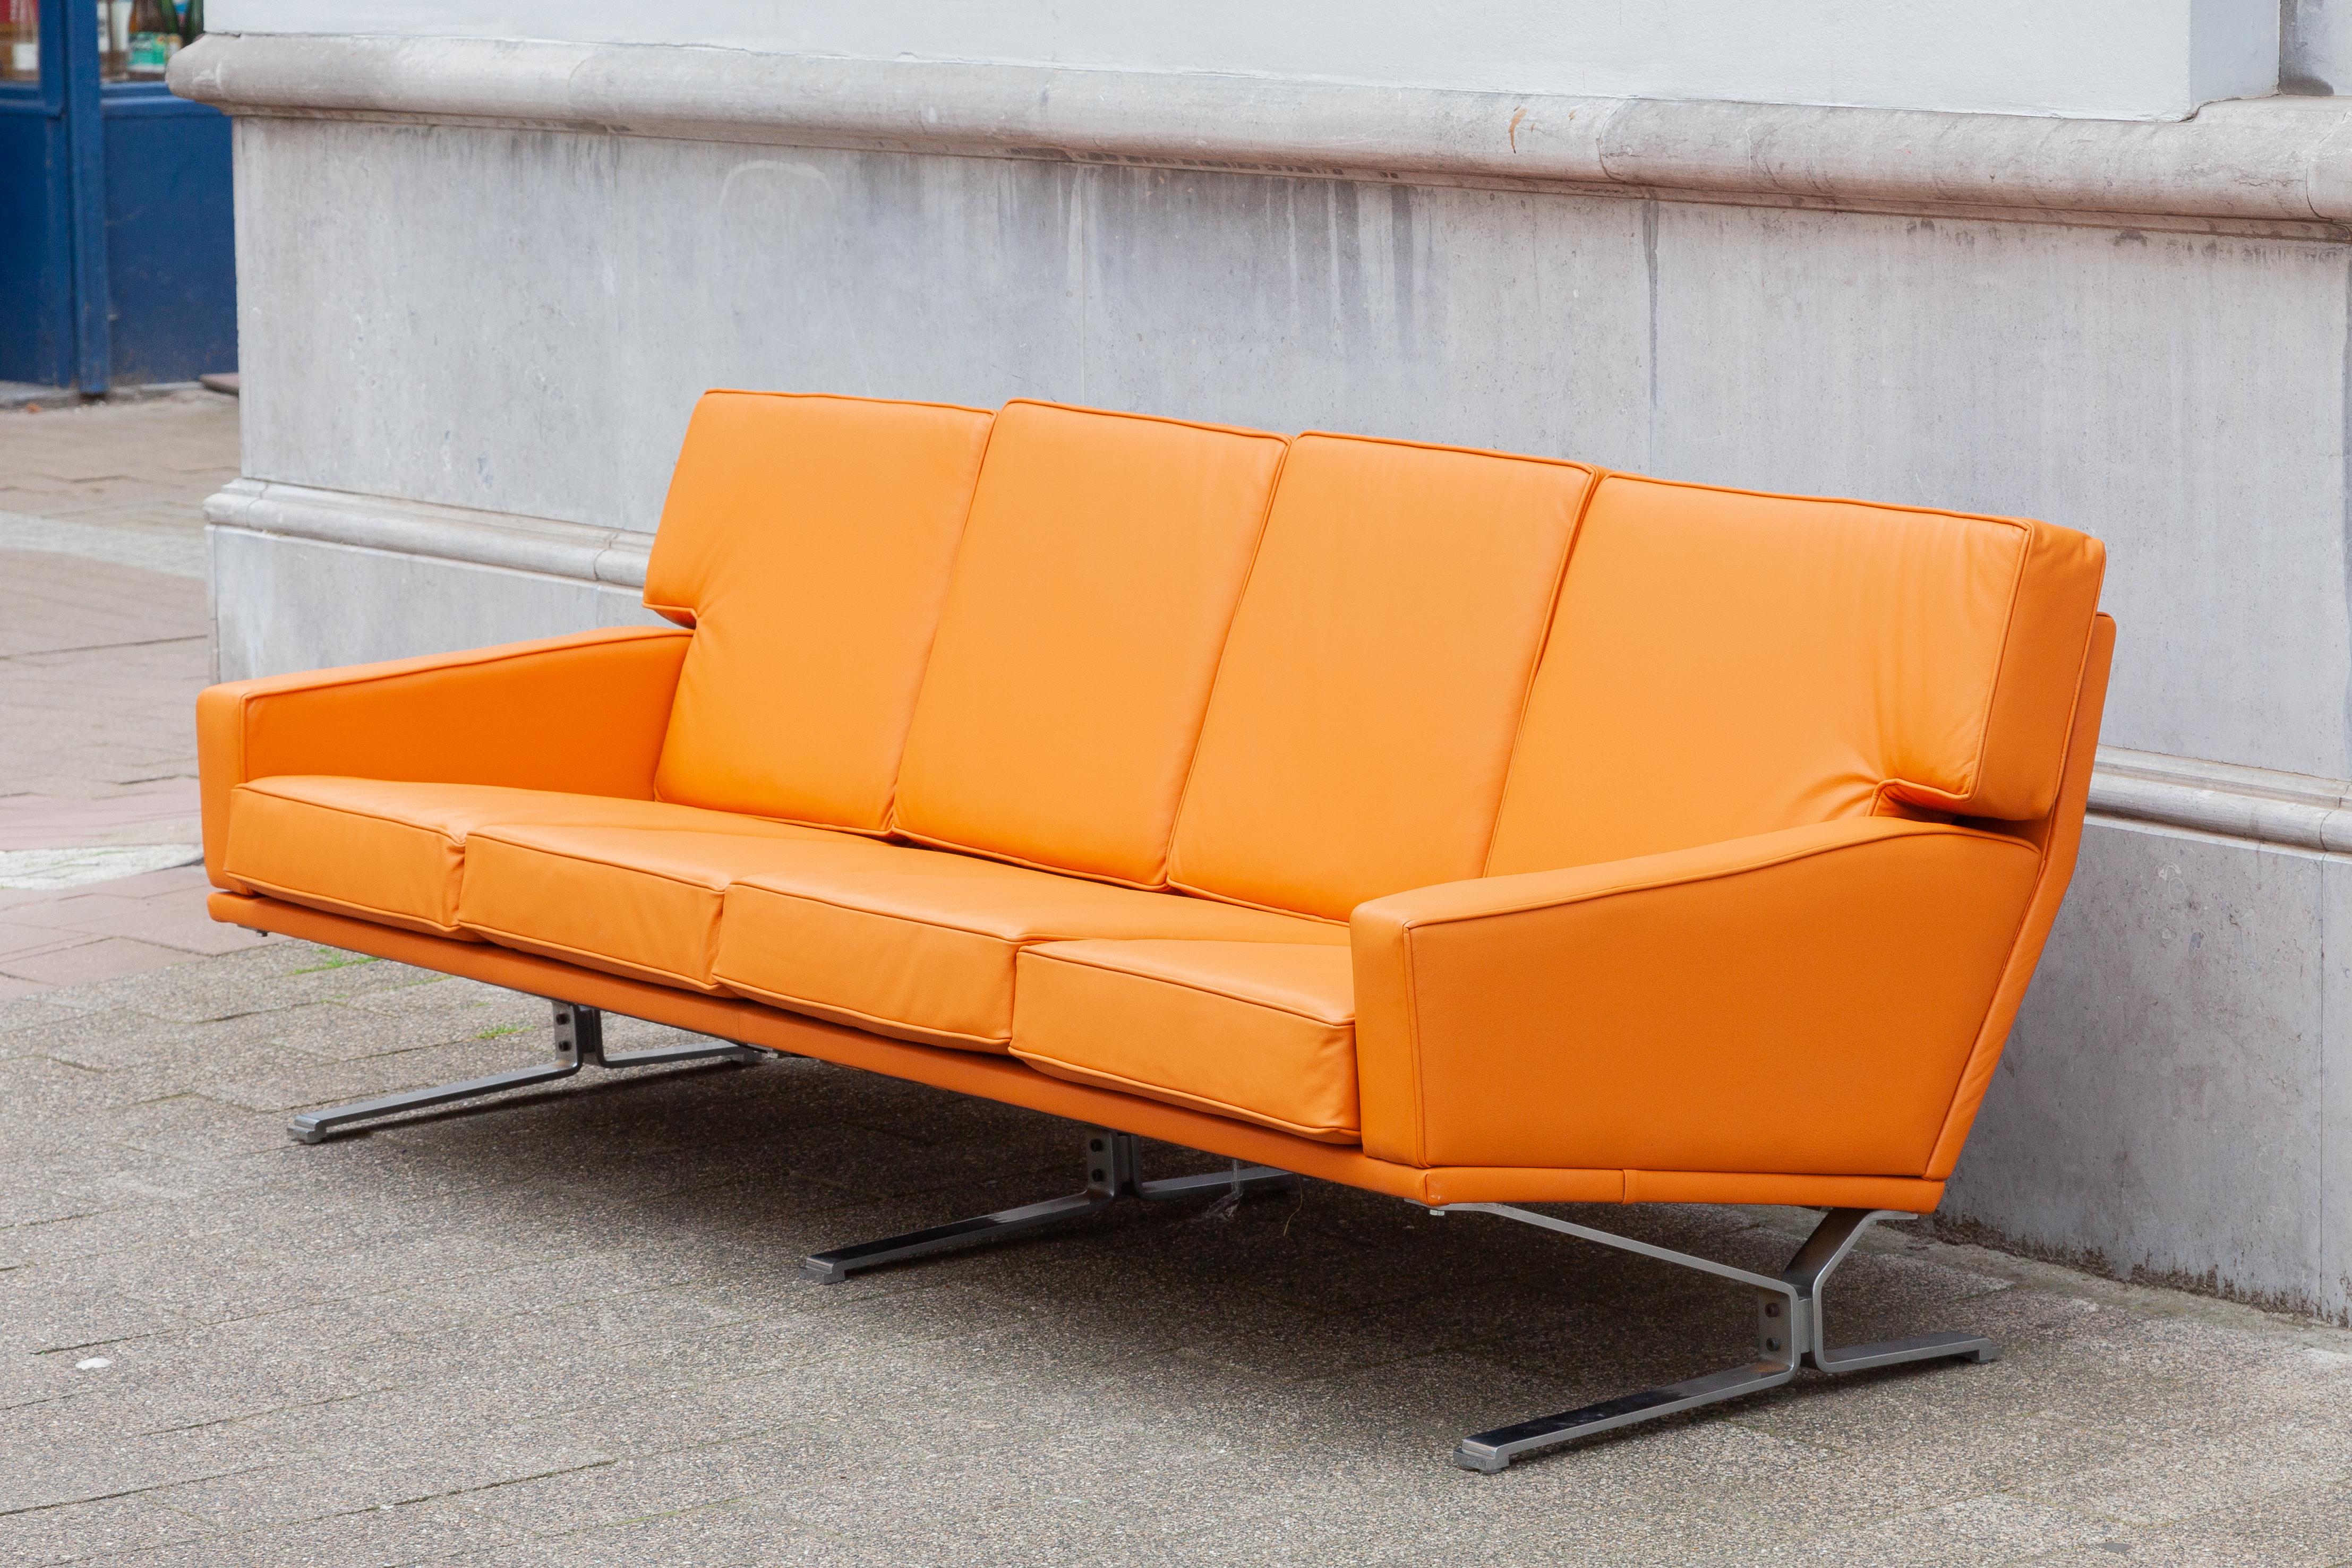 Mid-20th Century Midcentury Modern Cognac Color Four-Seat Sofa, Living Roomset, 1960s, Denmark For Sale